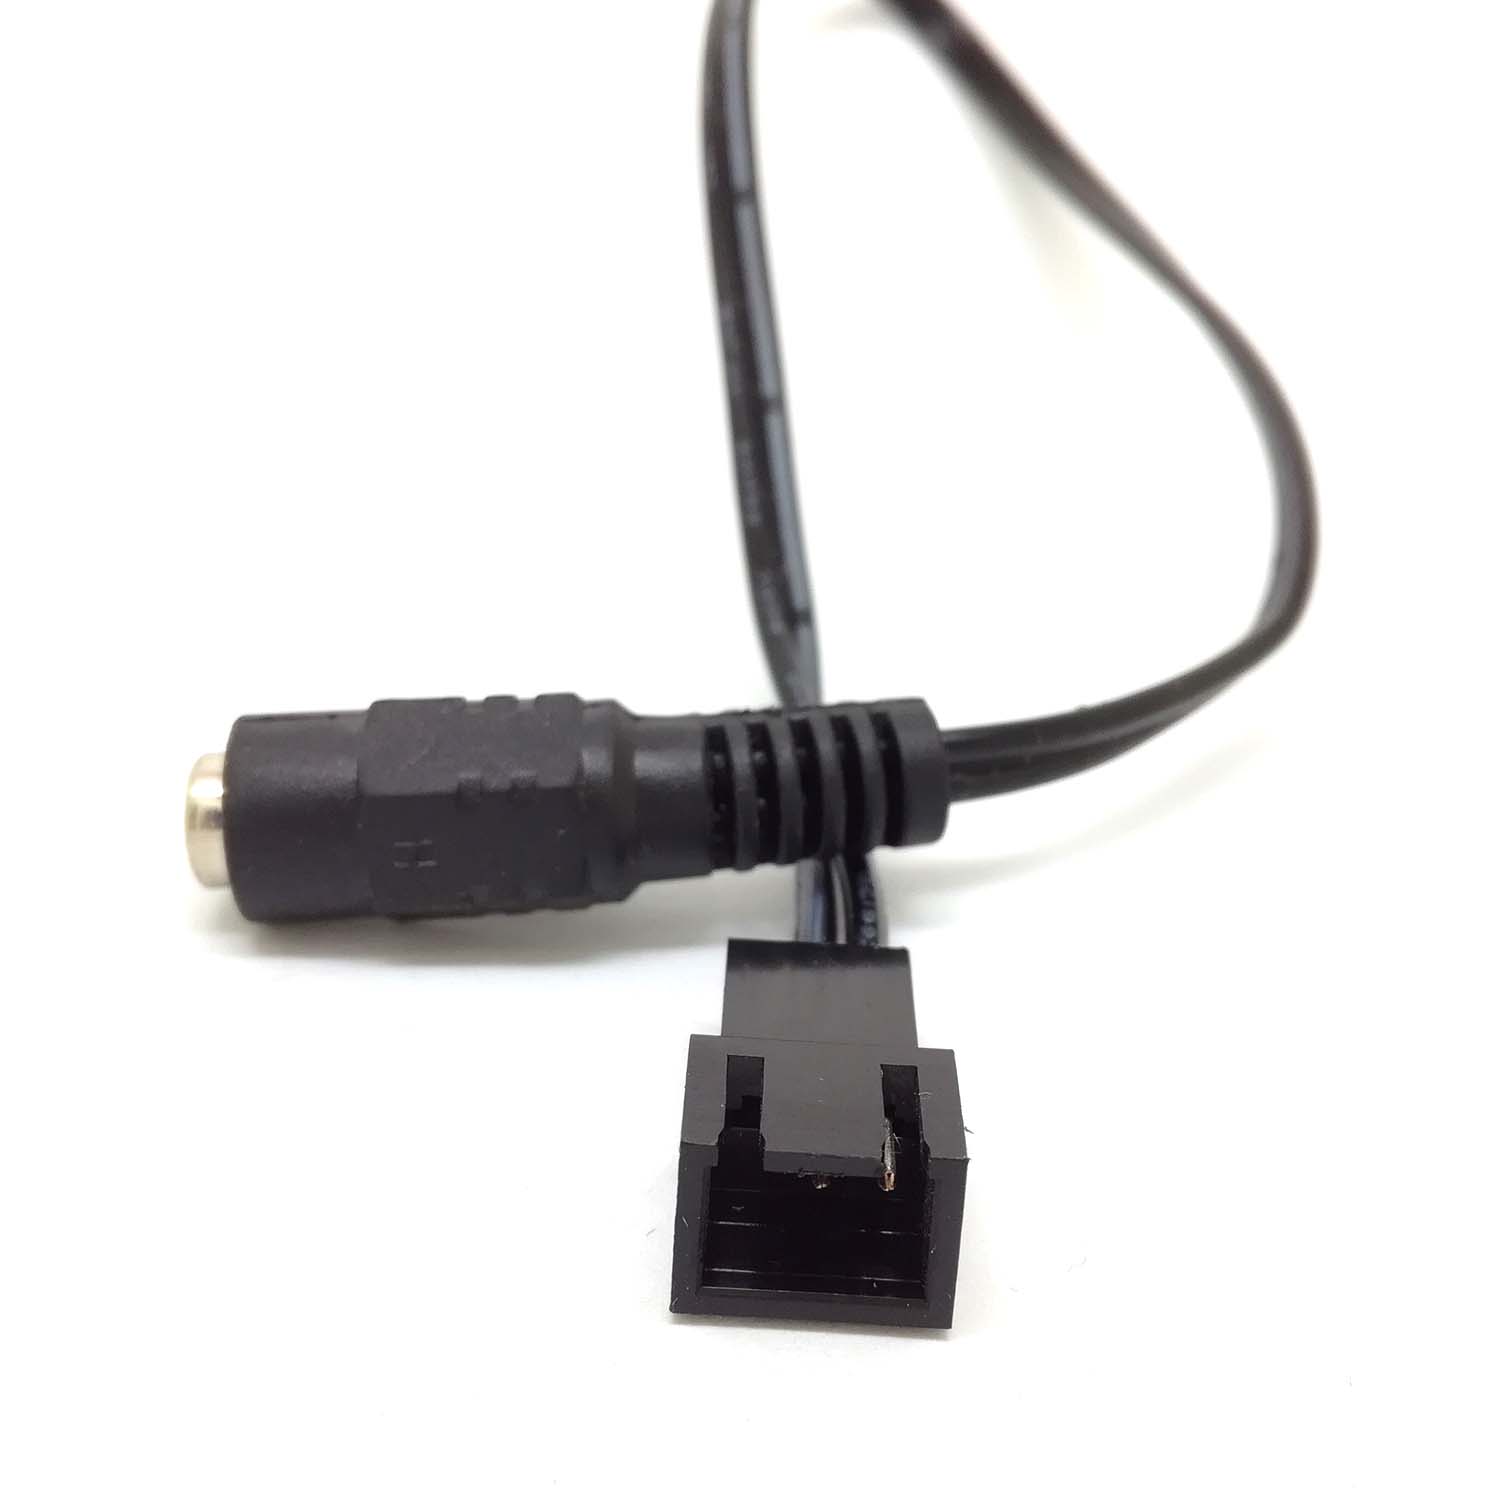 PC 3pin/2pin fans male to 5.5x2.1mm female DC Power cable 12v 9v 5v fan Route adapter convertor cord